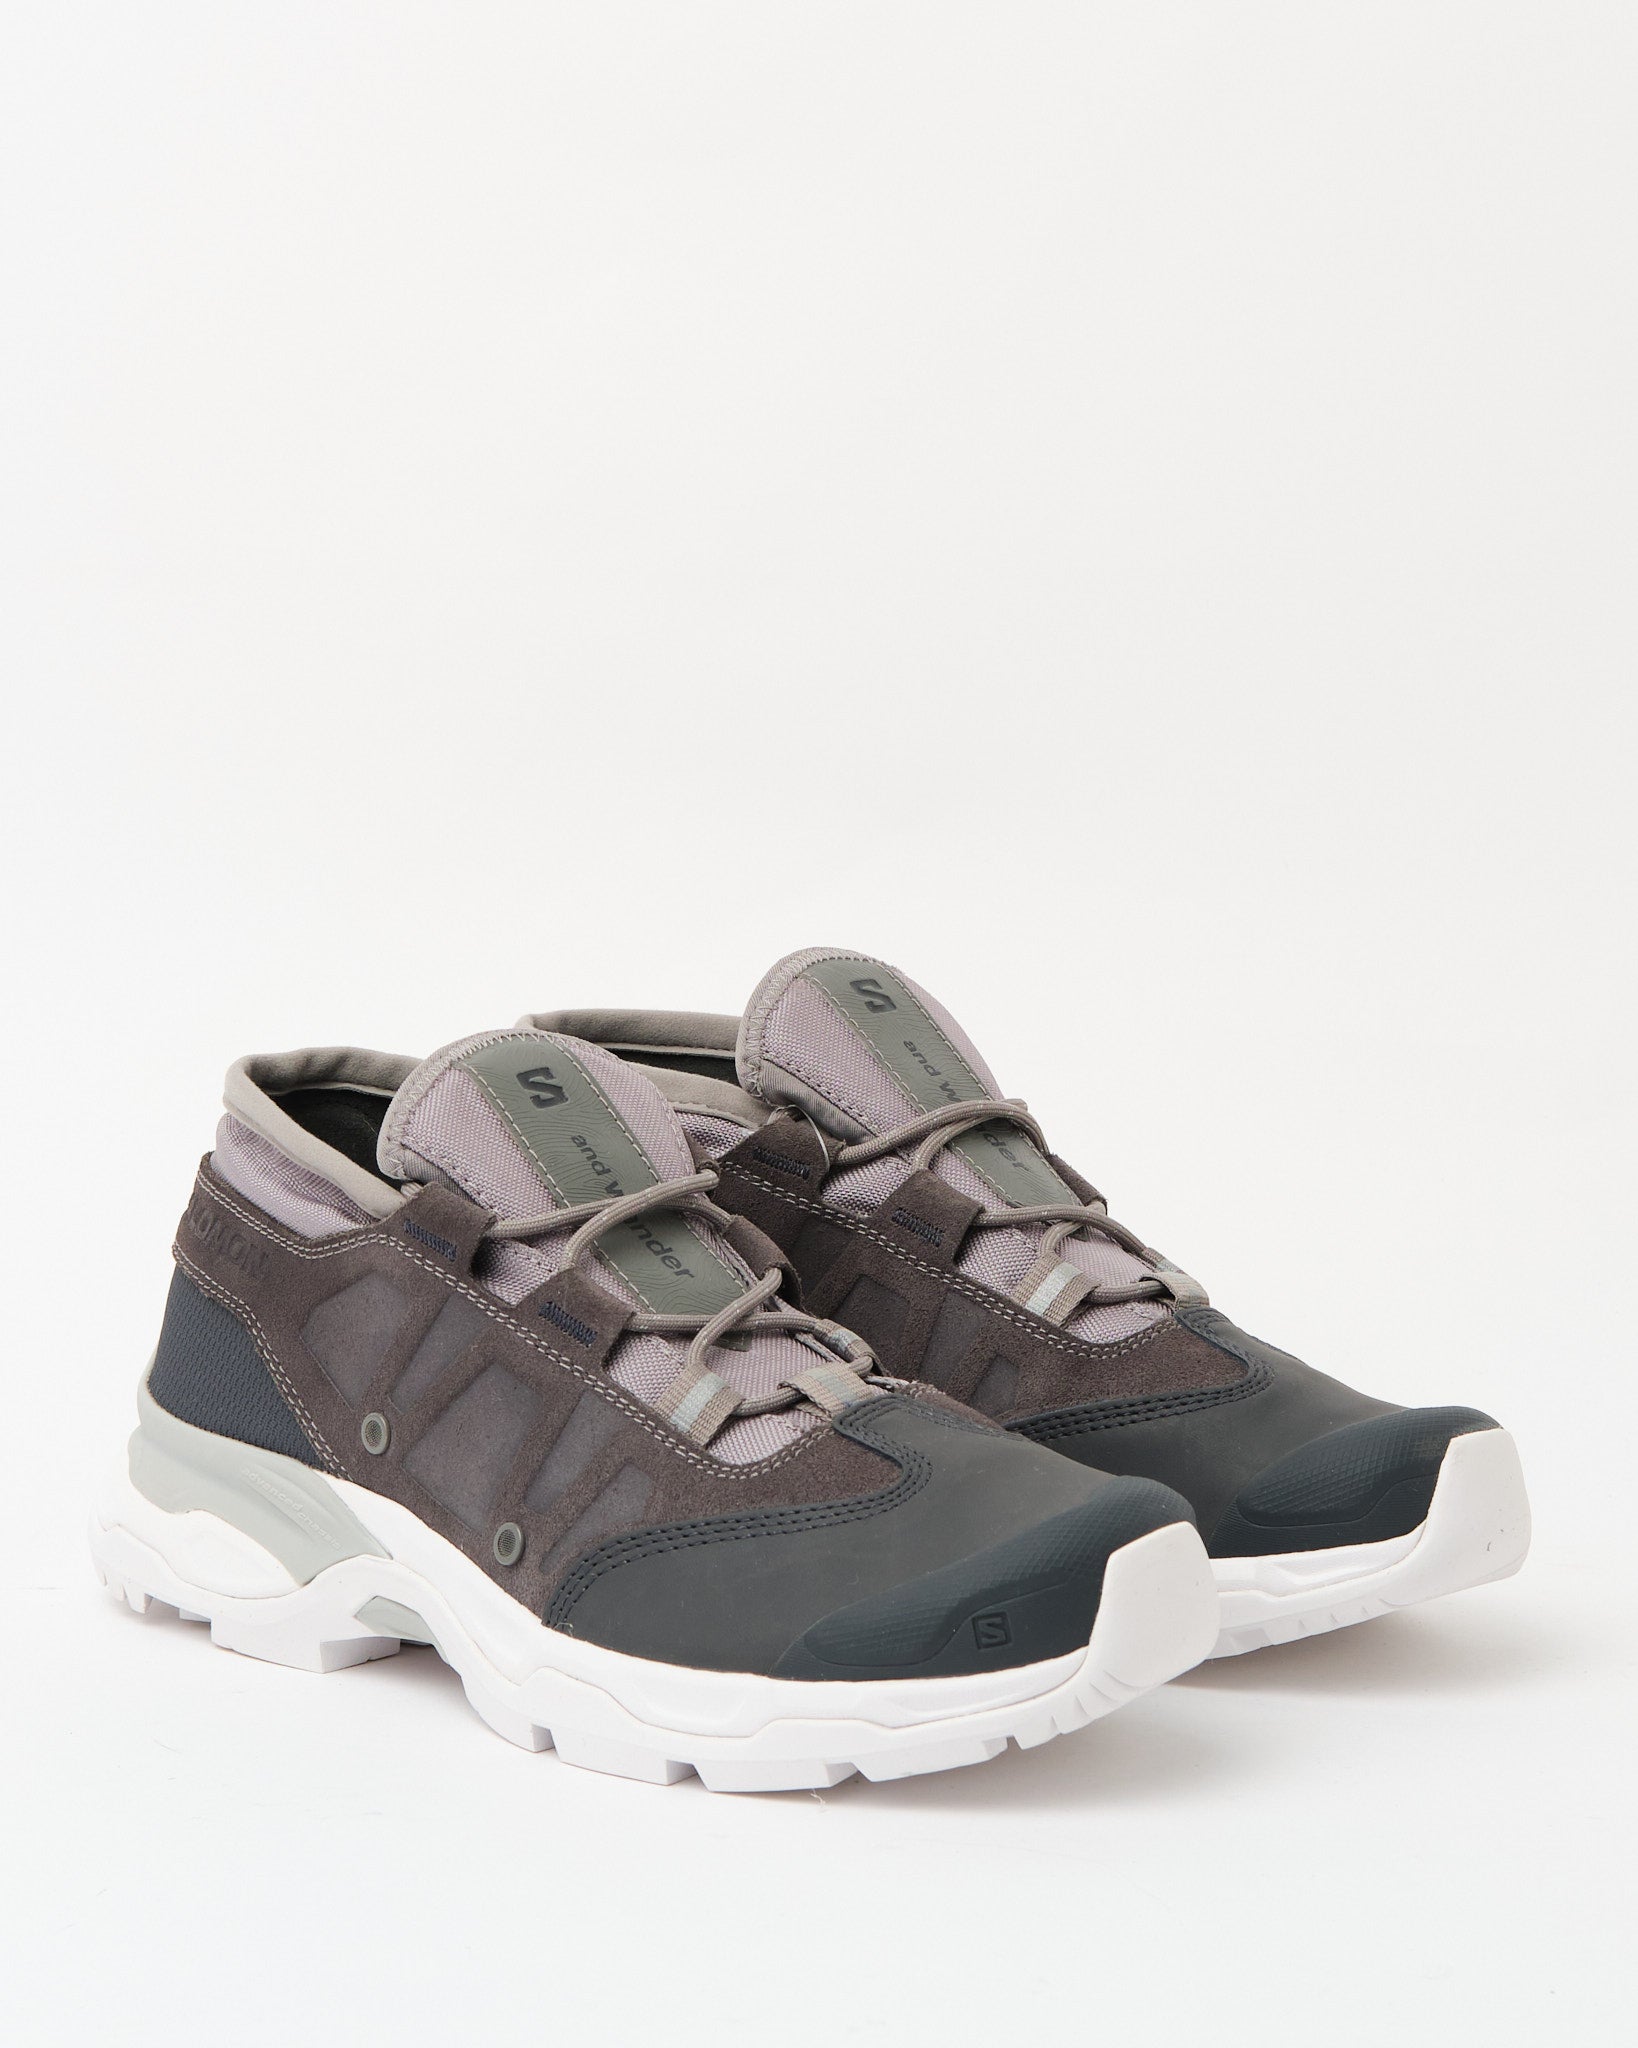 salomon Jungle Ultra low for and wander grey col. 020 - Meadow